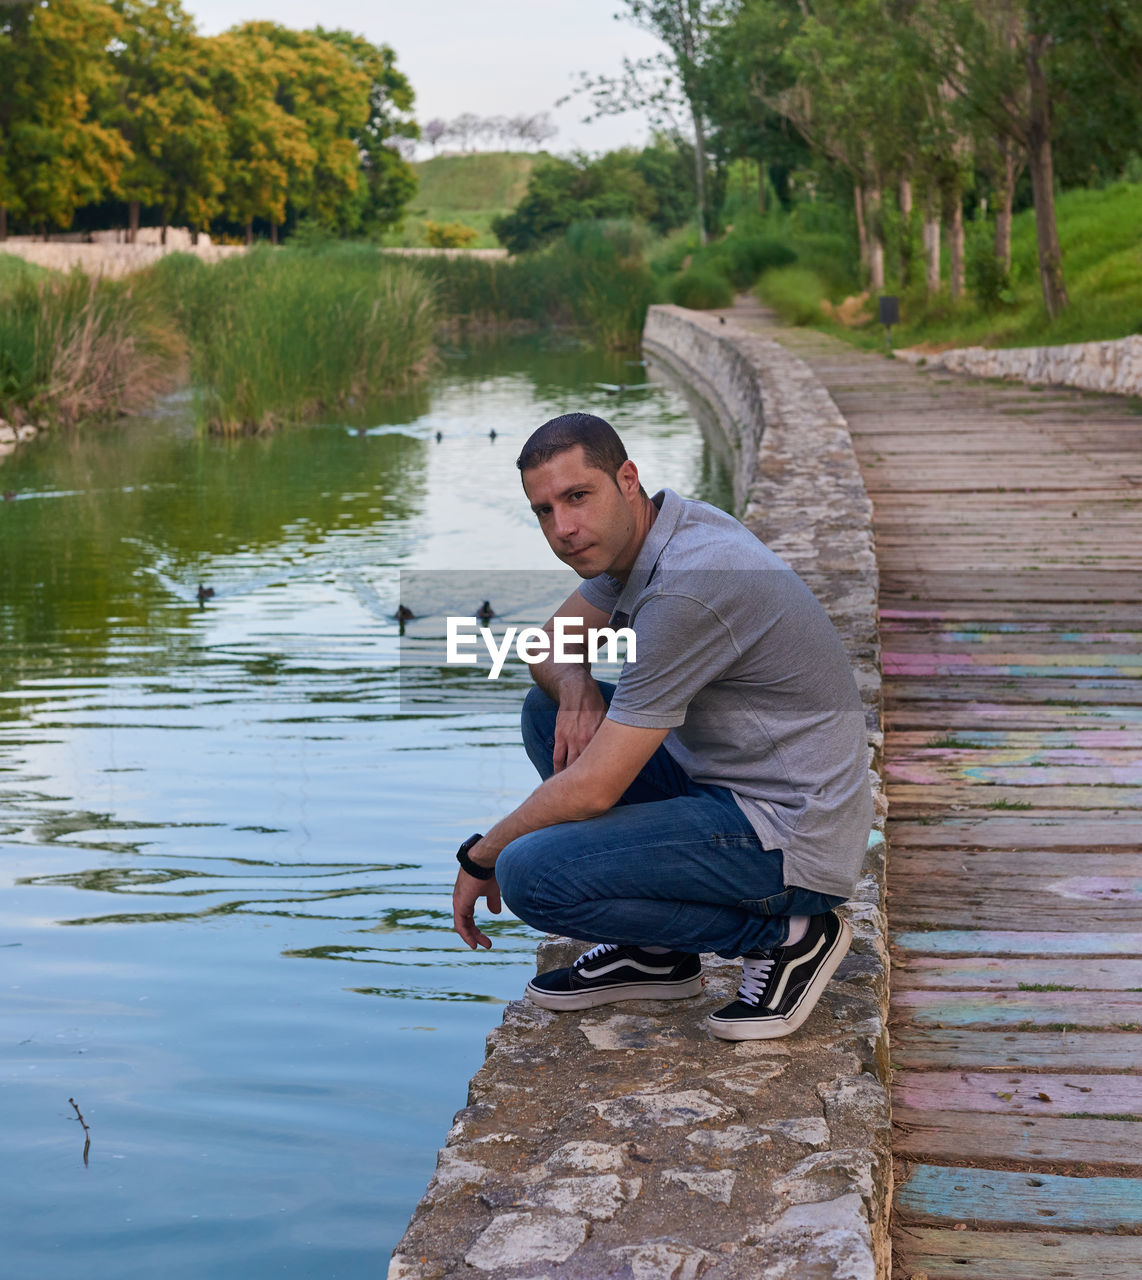 water, one person, men, adult, nature, full length, sitting, lake, plant, tree, casual clothing, leisure activity, day, lifestyles, side view, outdoors, fishing, young adult, crouching, occupation, looking, activity, environment, rural scene